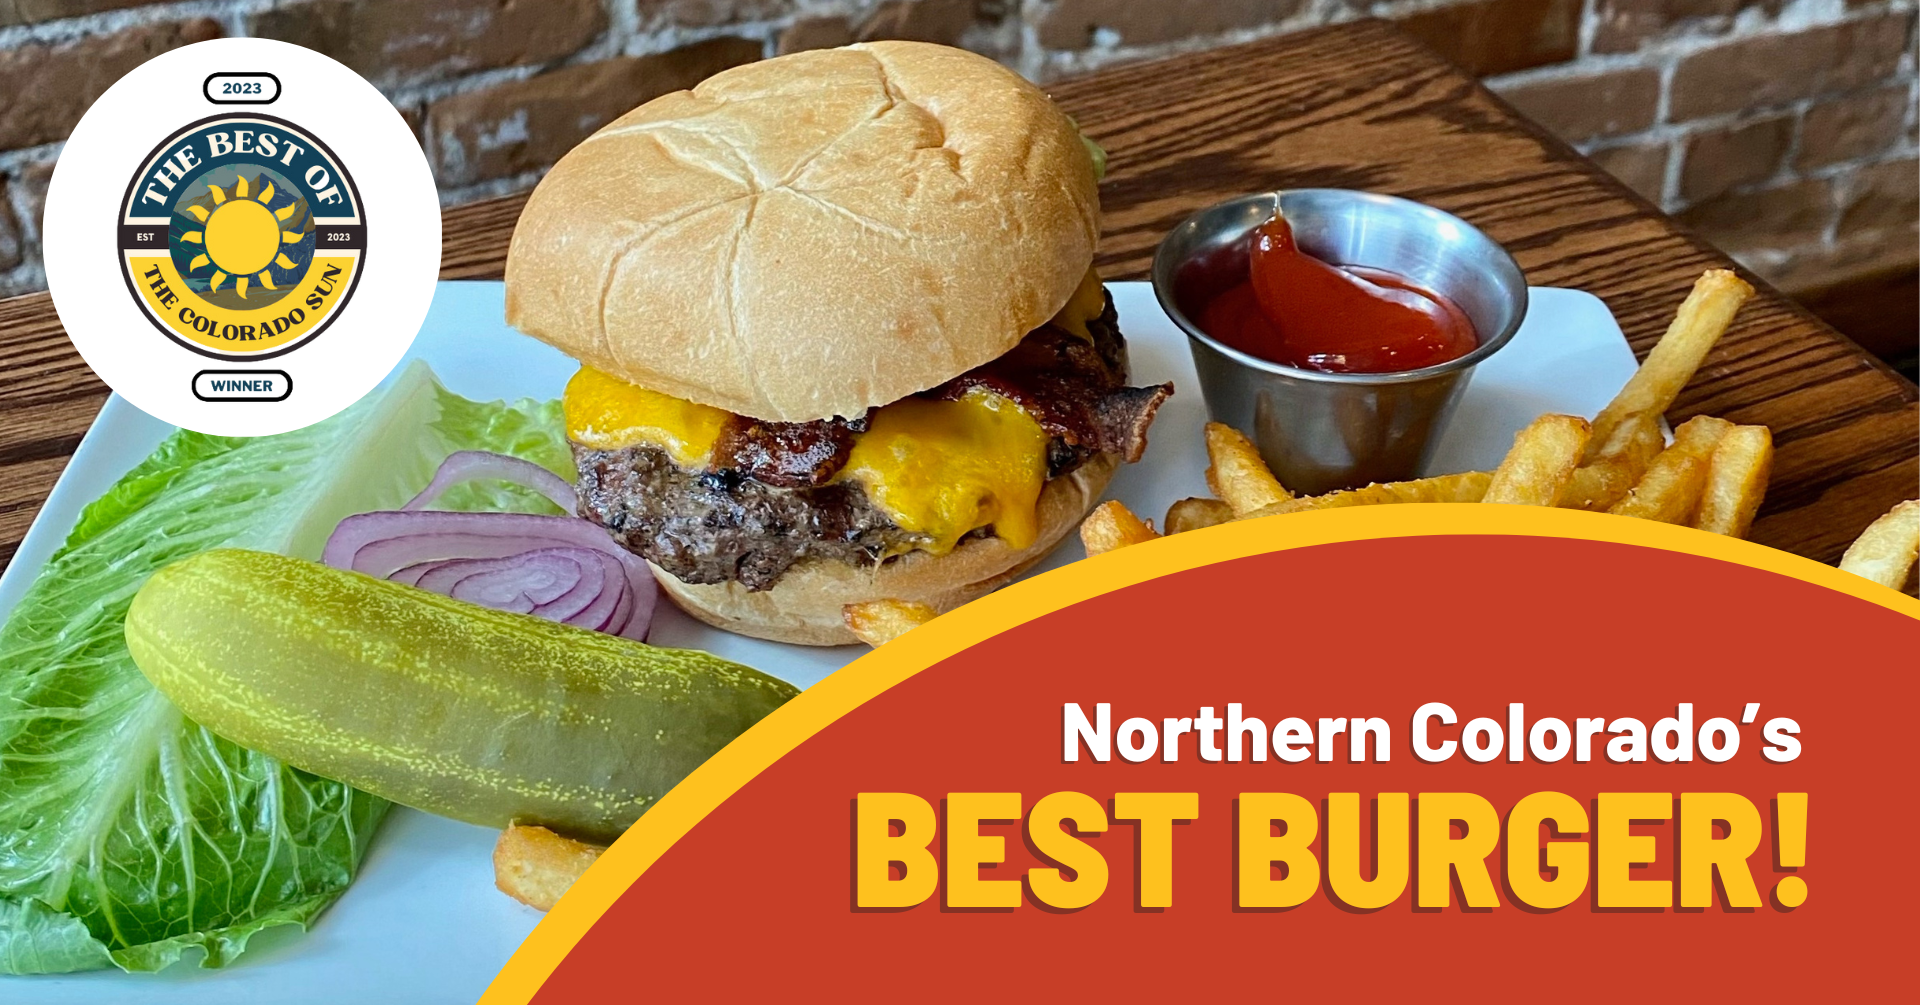 Best Burger in Northern Colorado banner with badge